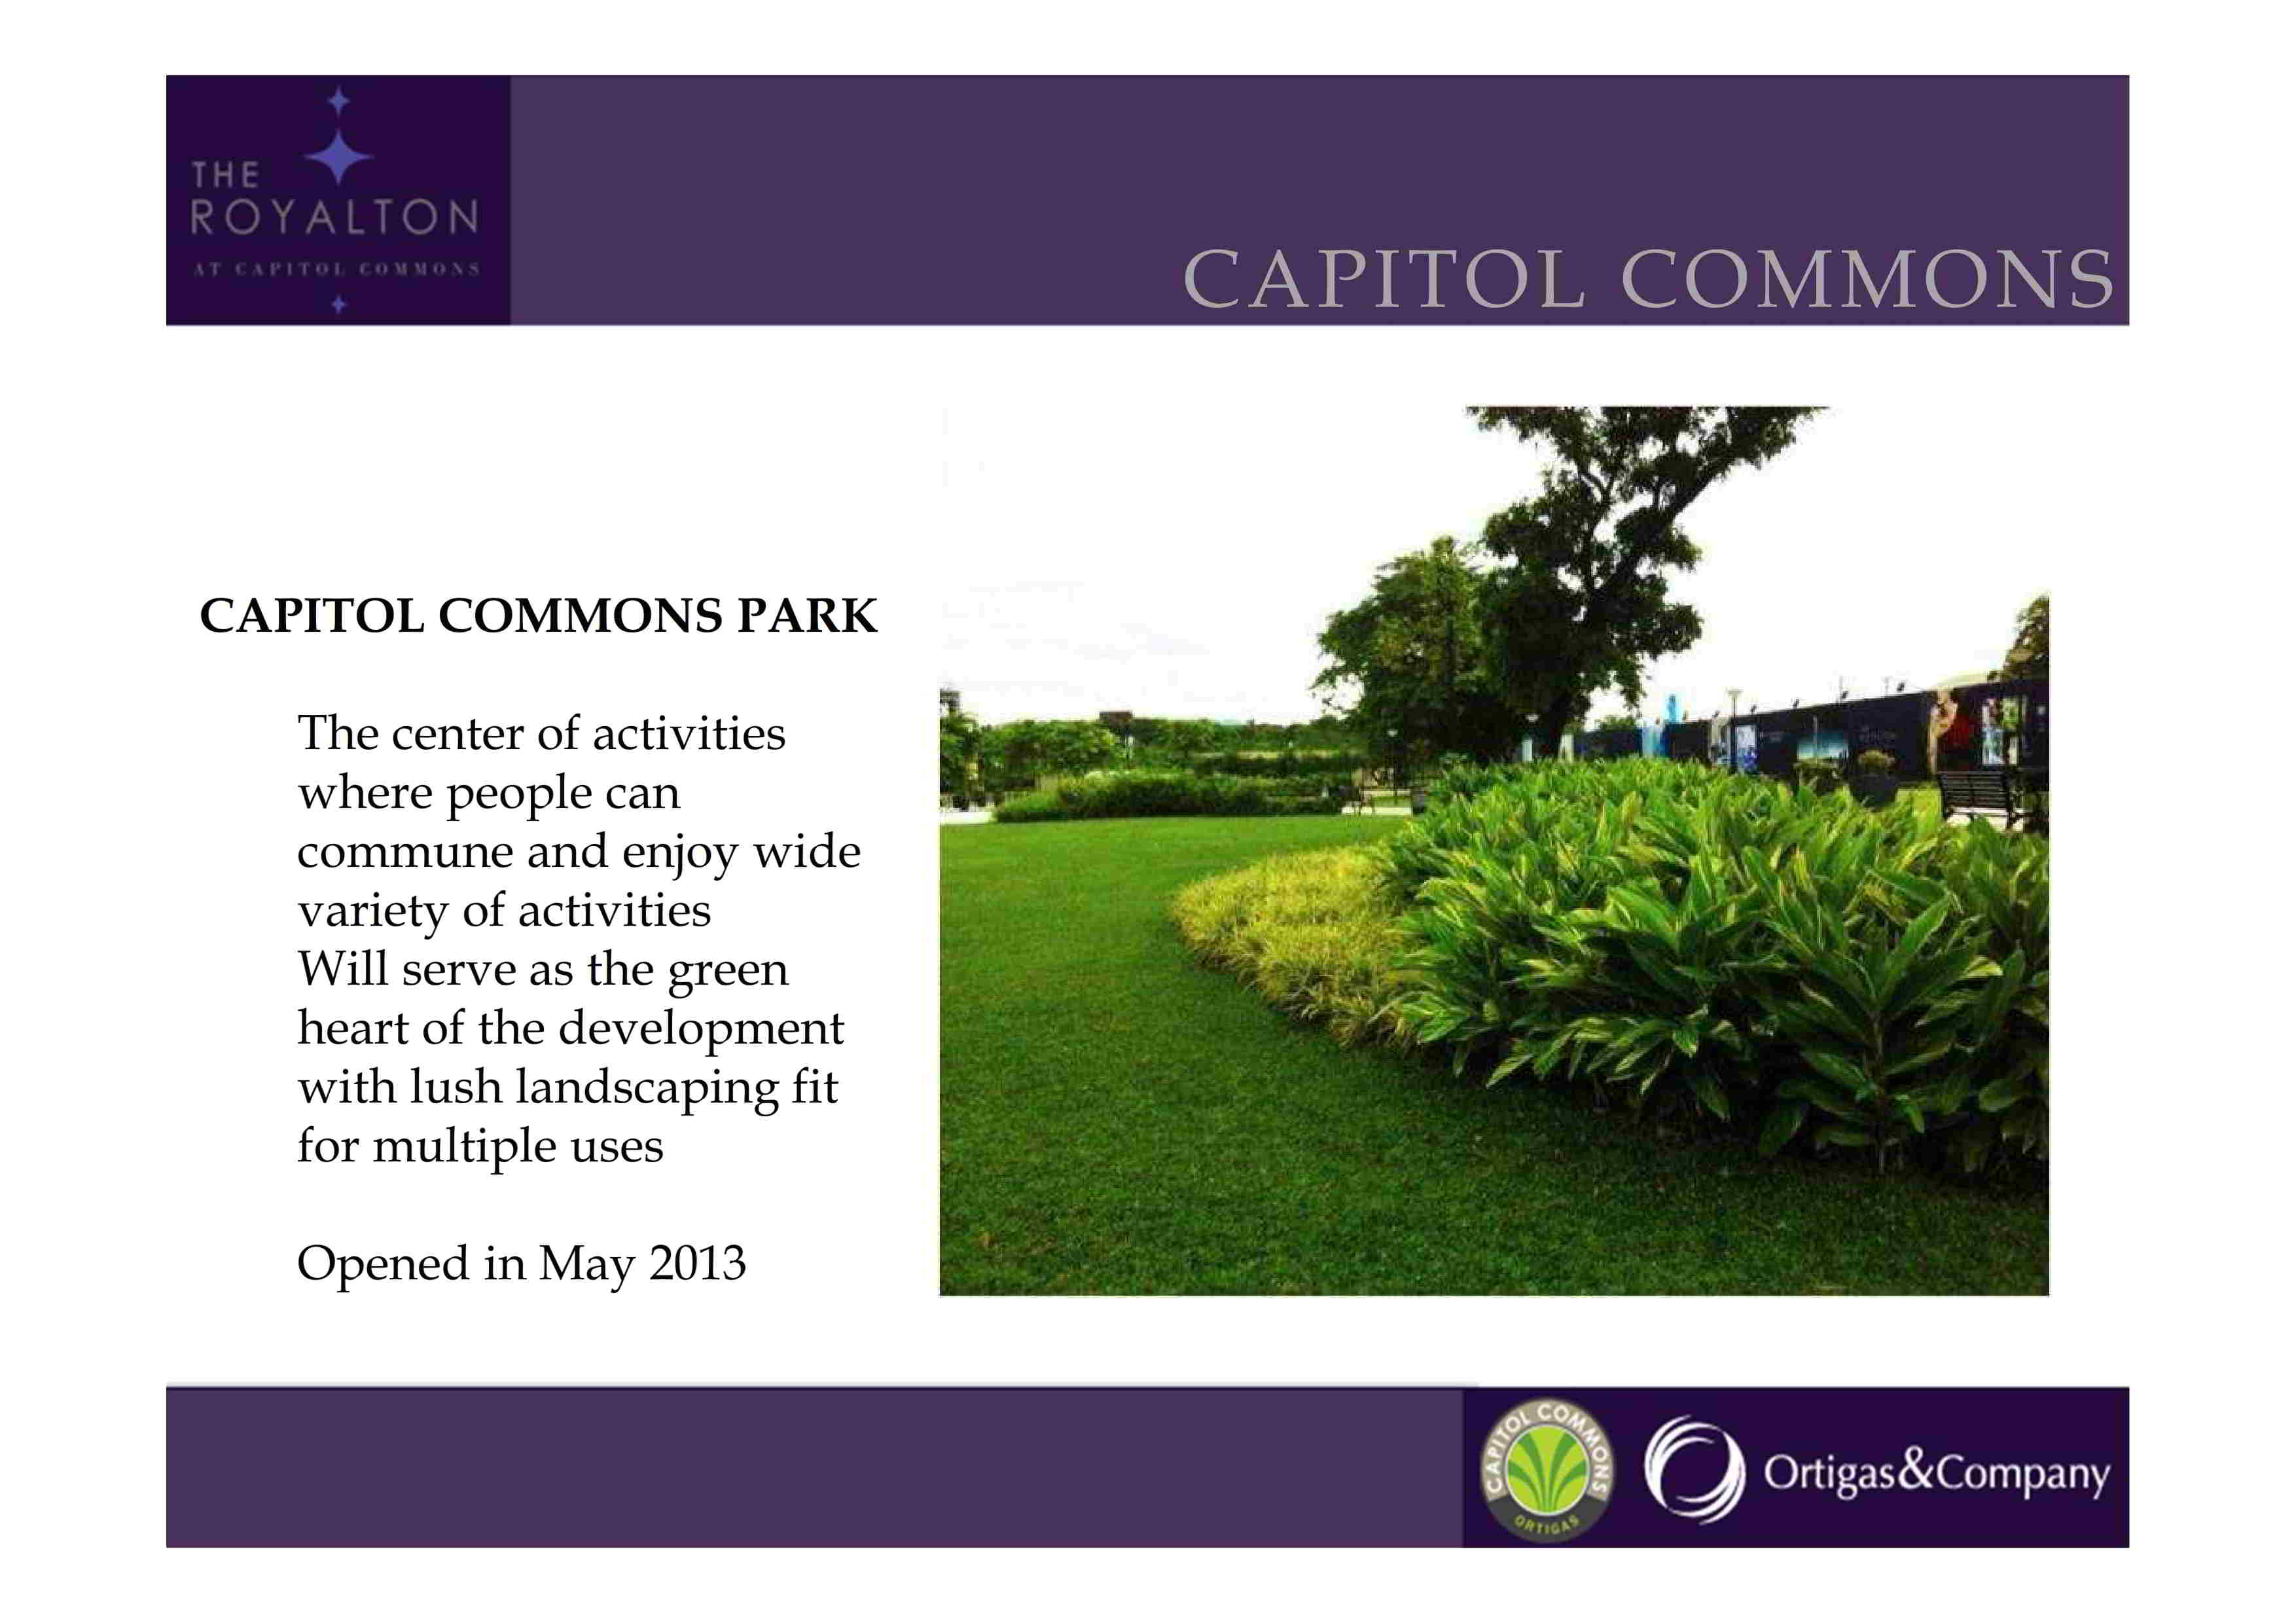 THE ROYALTON CAPITOL COMMONS BY ORTIGAS AND COMPANY